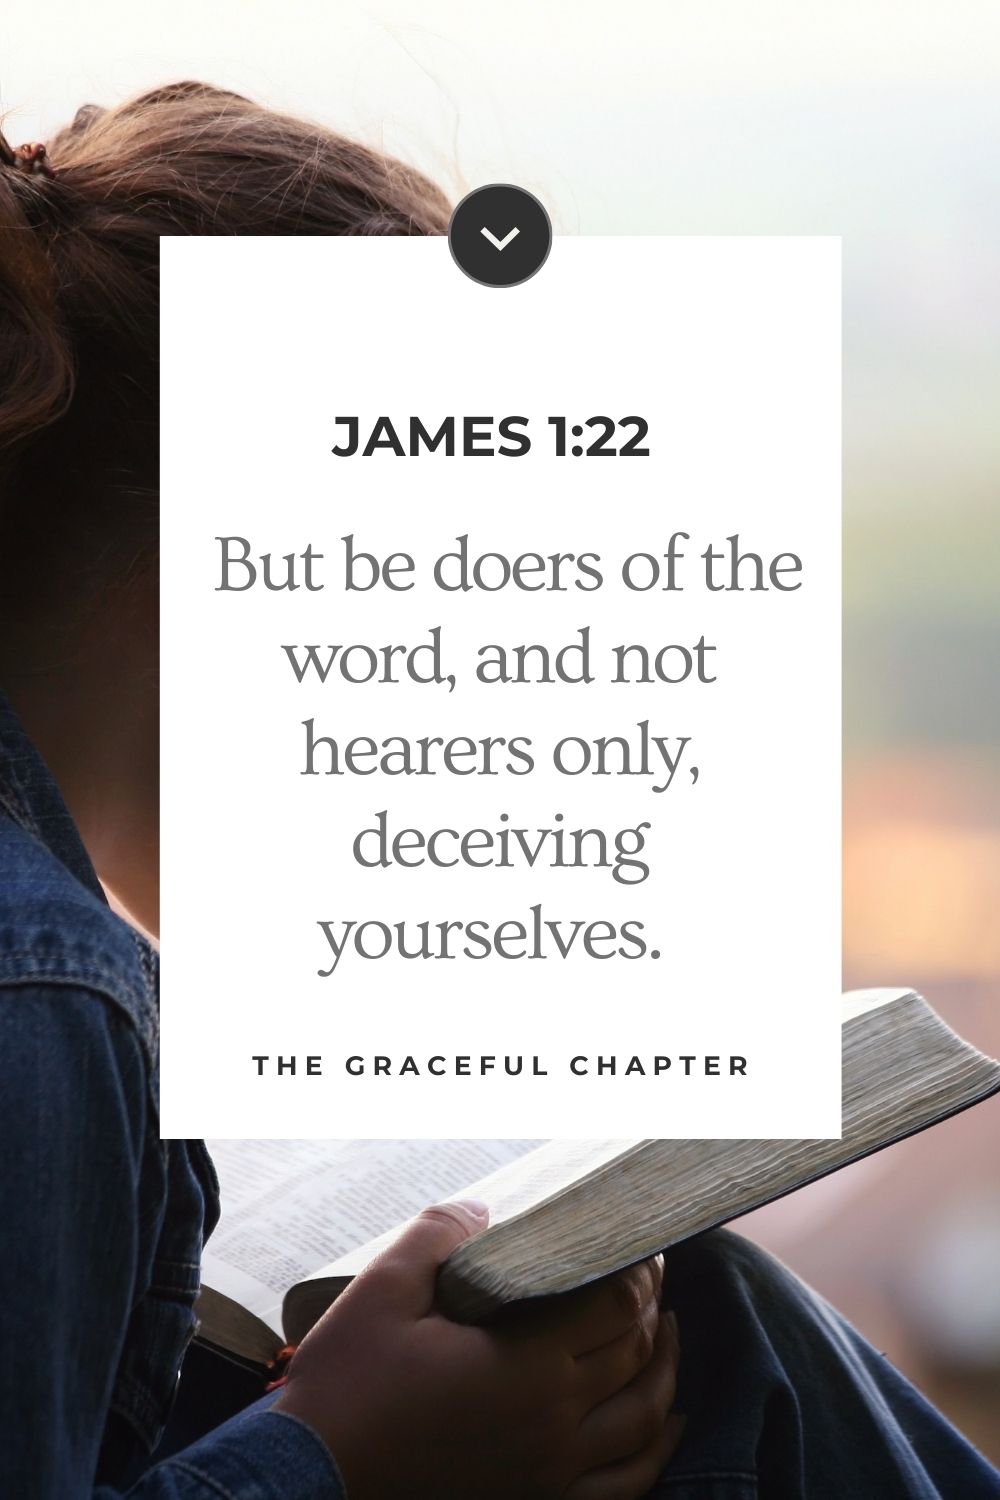  But be doers of the word, and not hearers only, deceiving yourselves. 